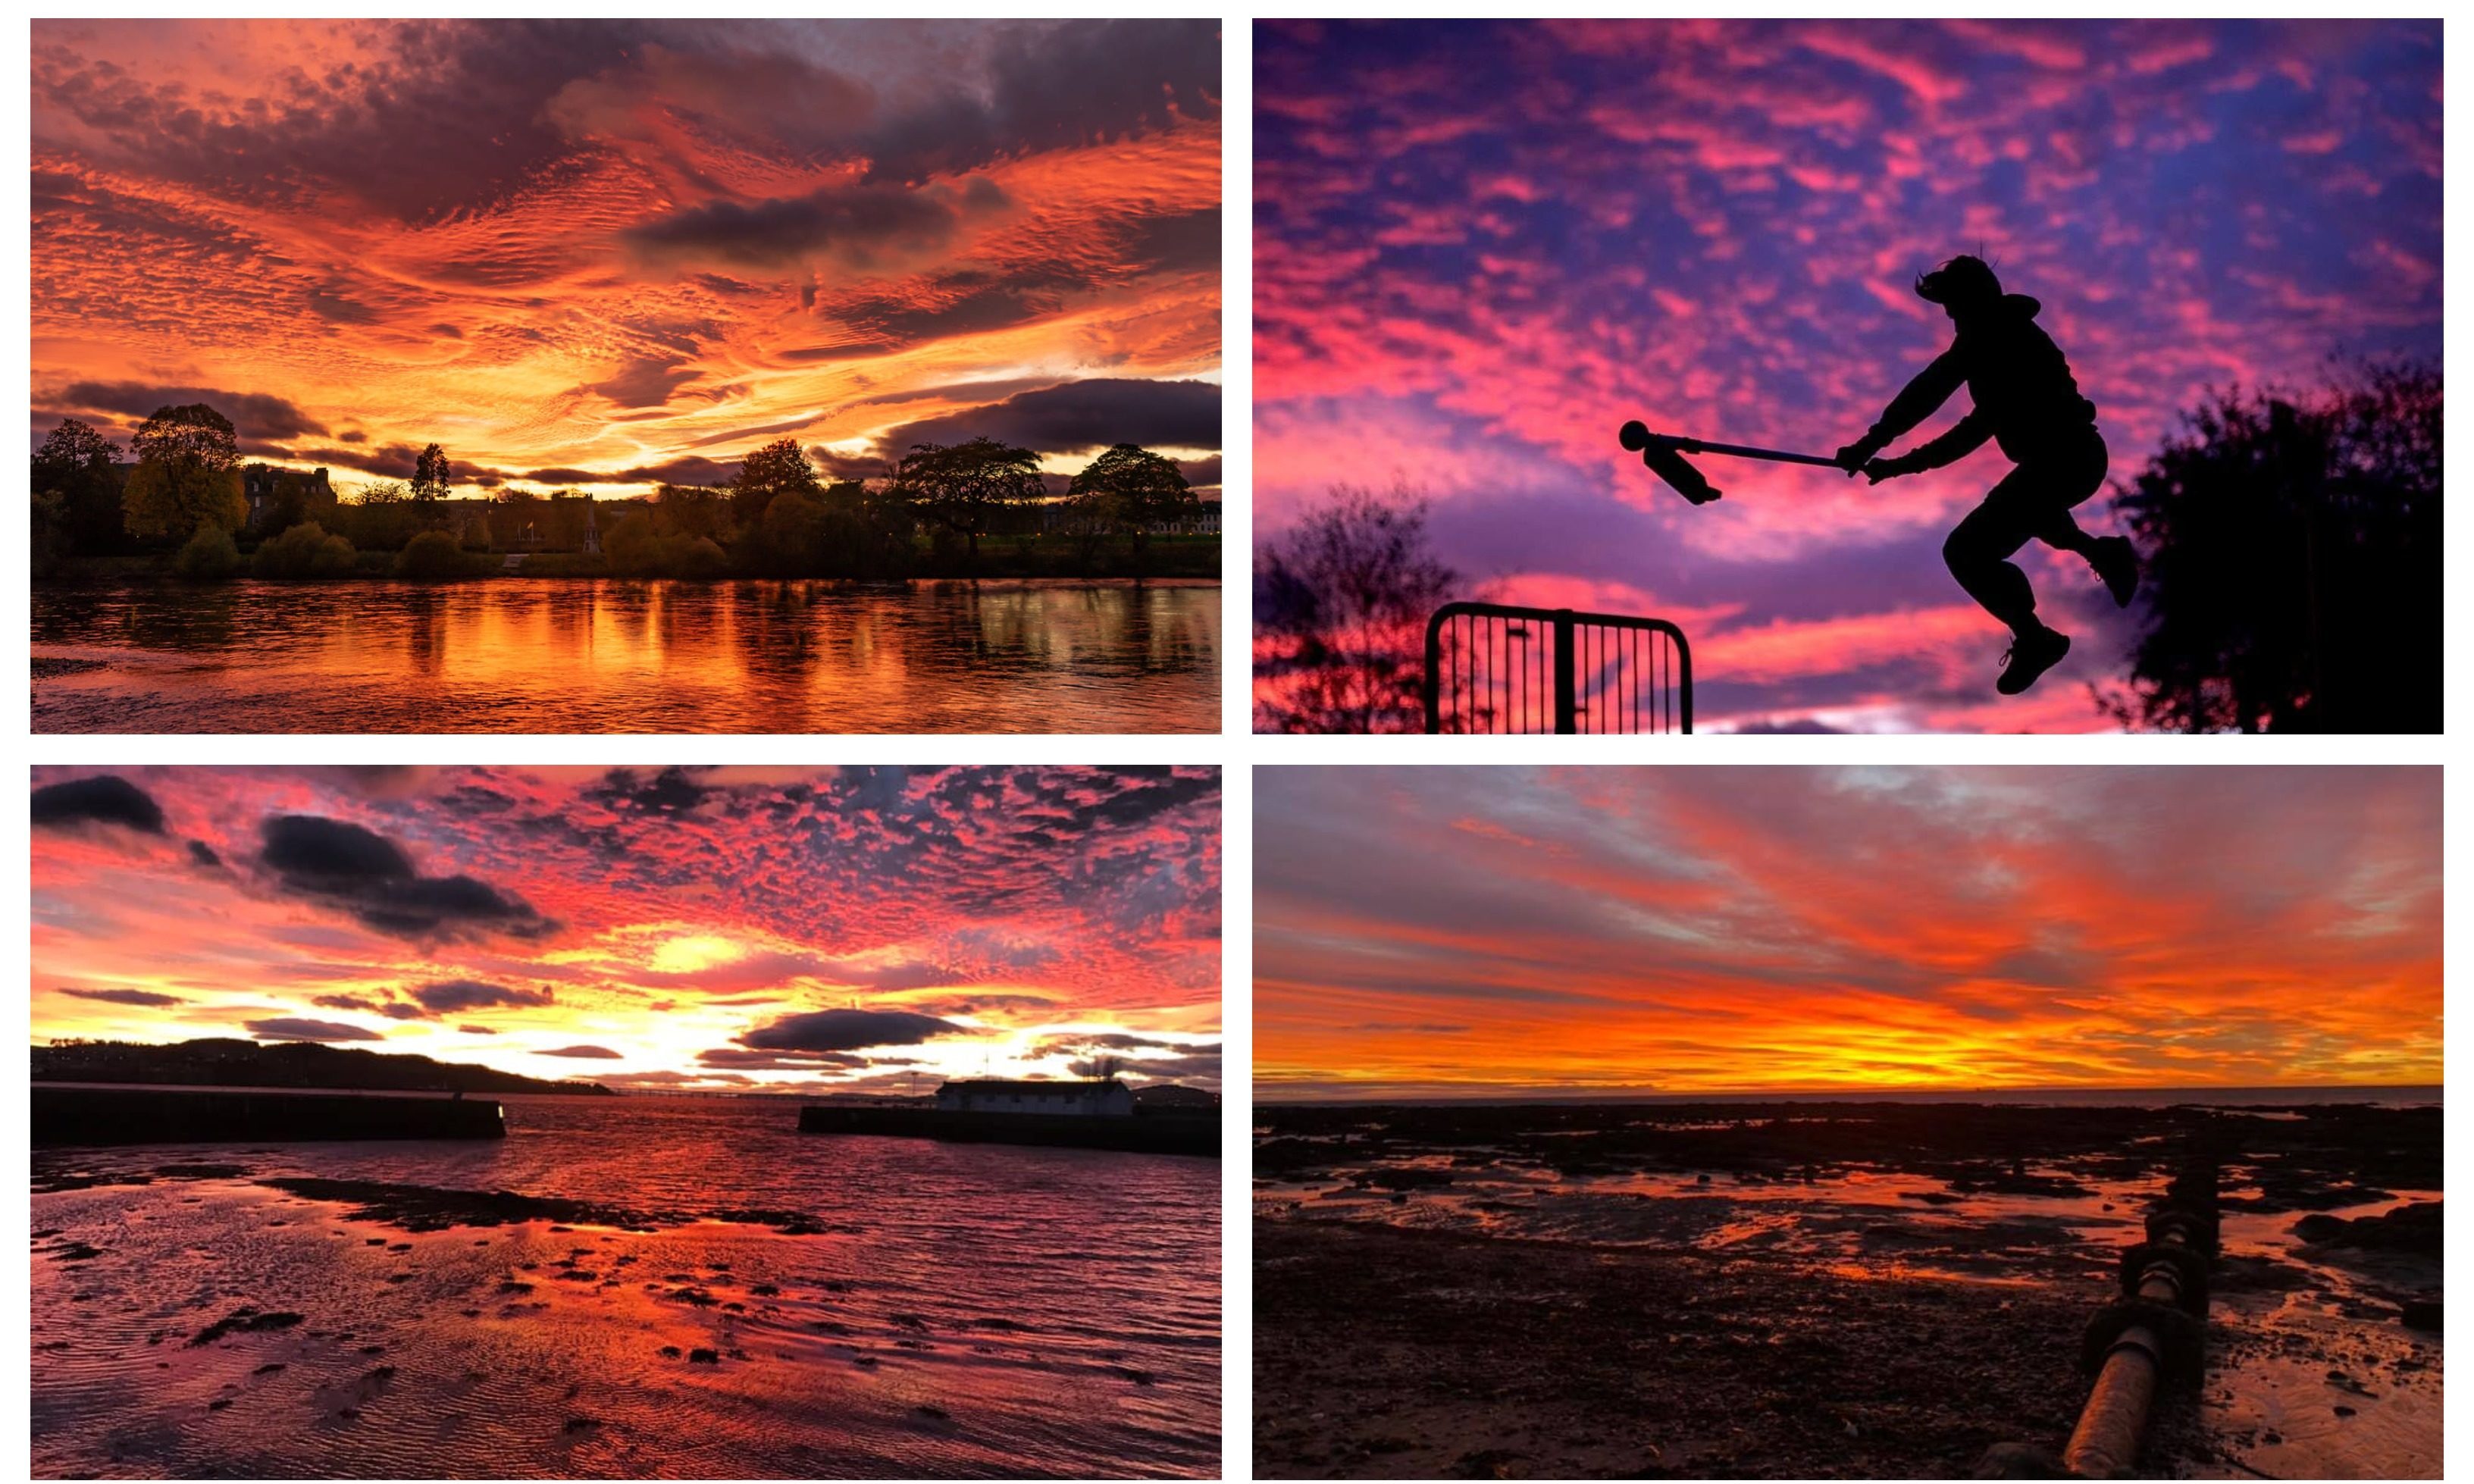 These photos of Wednesdays sky were taken by readers Michael Souter, Heidi Hayward, Kirsty Speers and Vicky Gunn. They were submitted to our Facebook page.